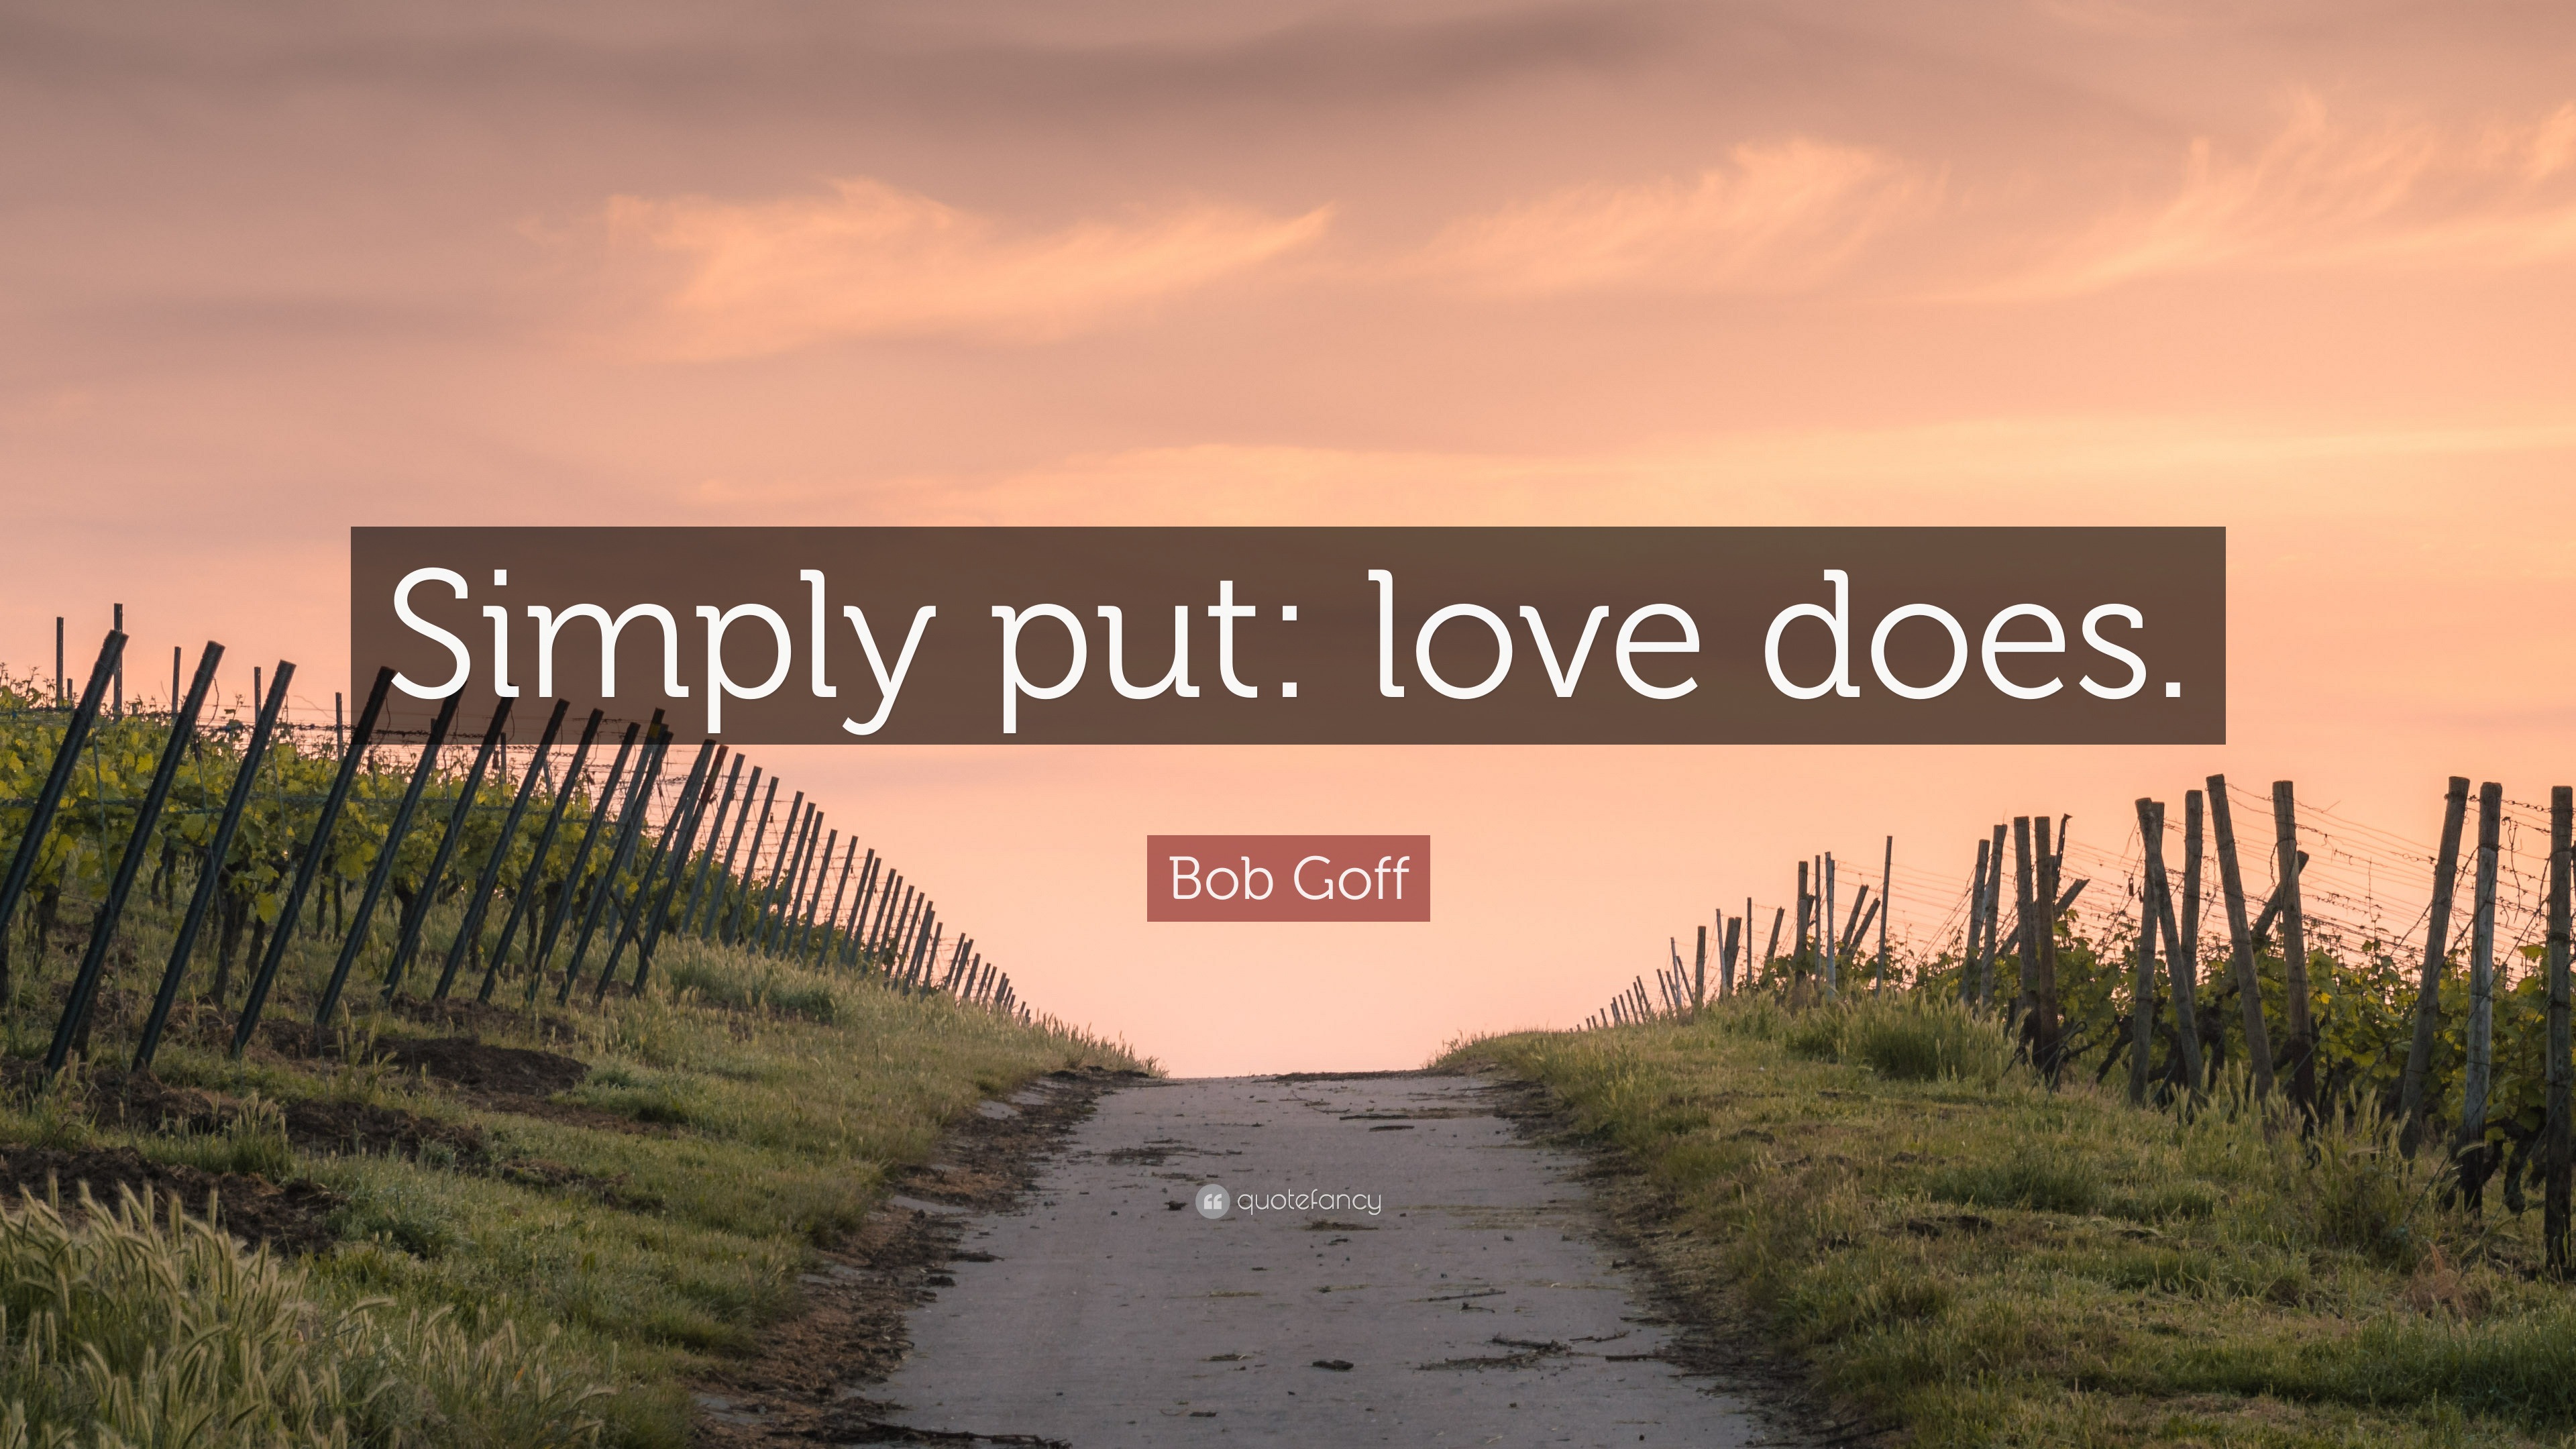 Bob Goff Quotes 100 Wallpapers Quotefancy